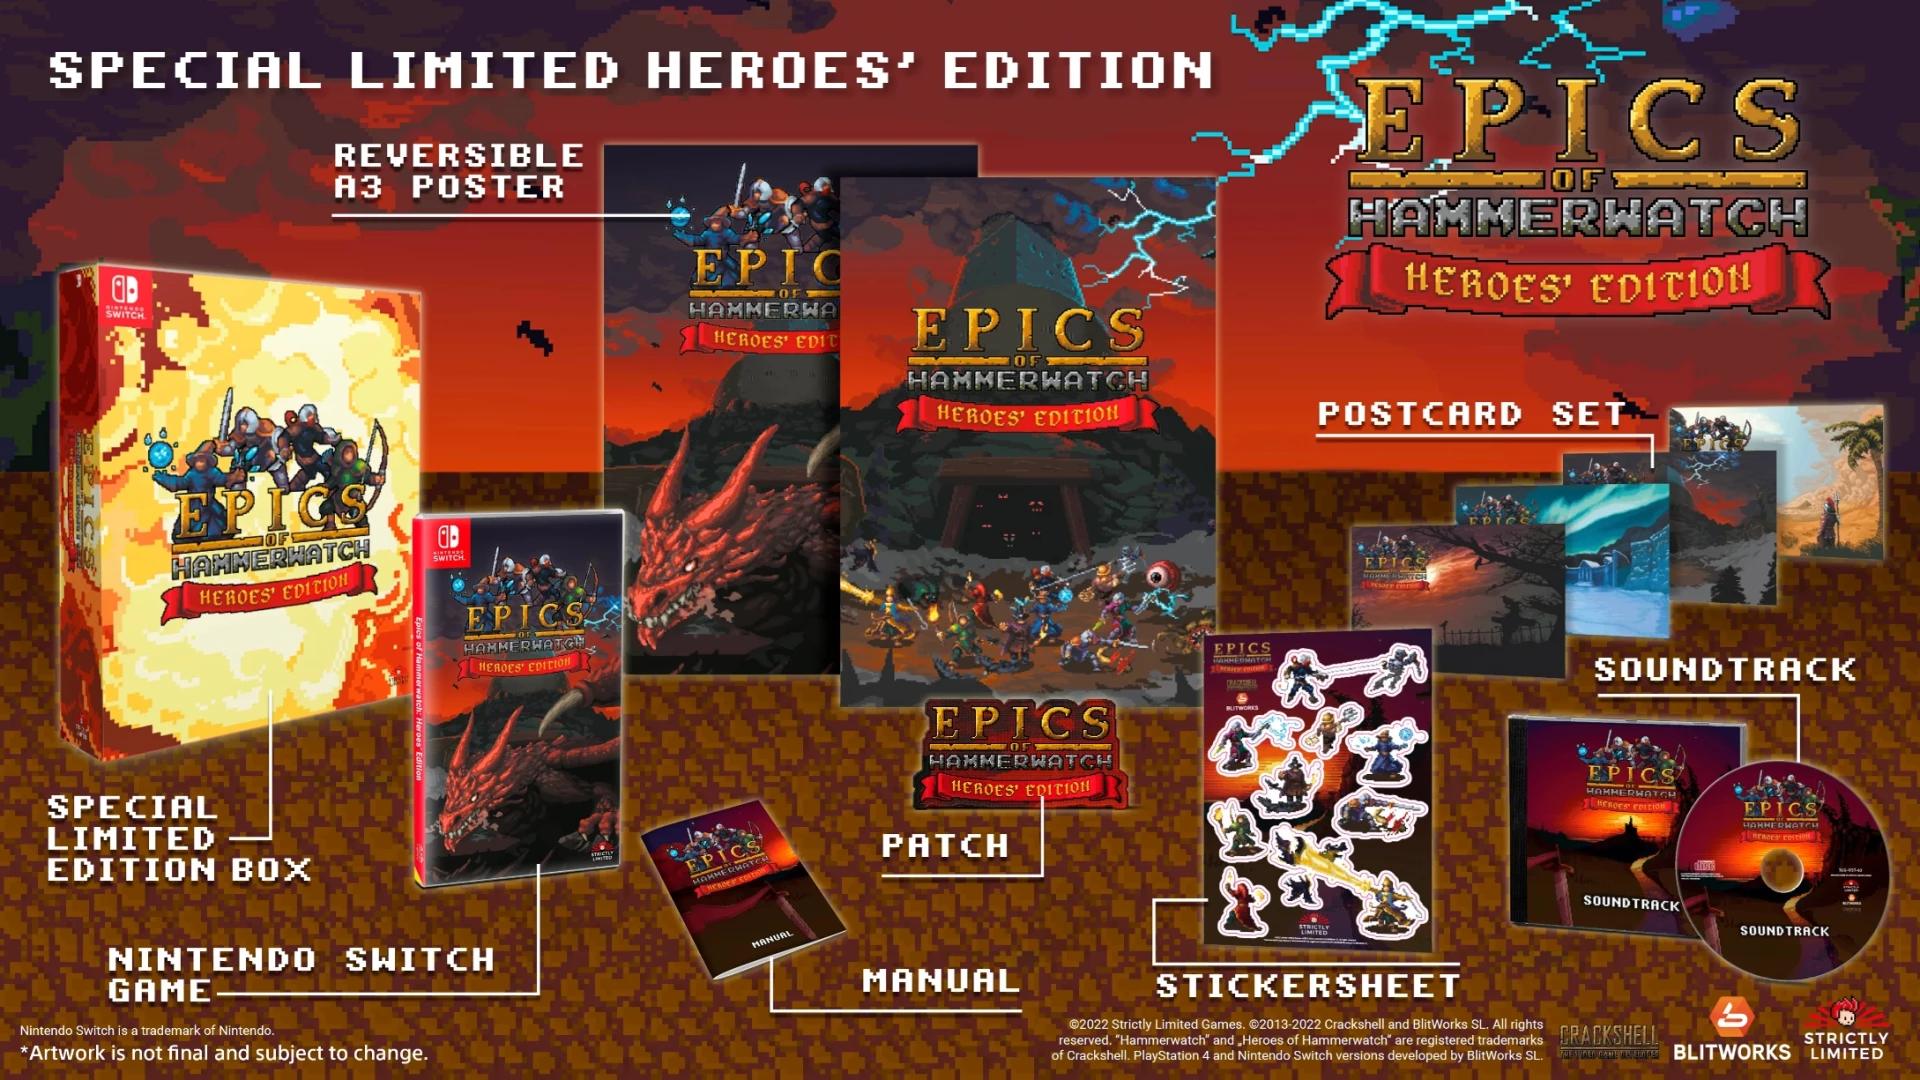 Epics of Hammerwatch - Special Limited Heroes Edition (Strictly Limited) (Switch), CrackShell, Blitworks